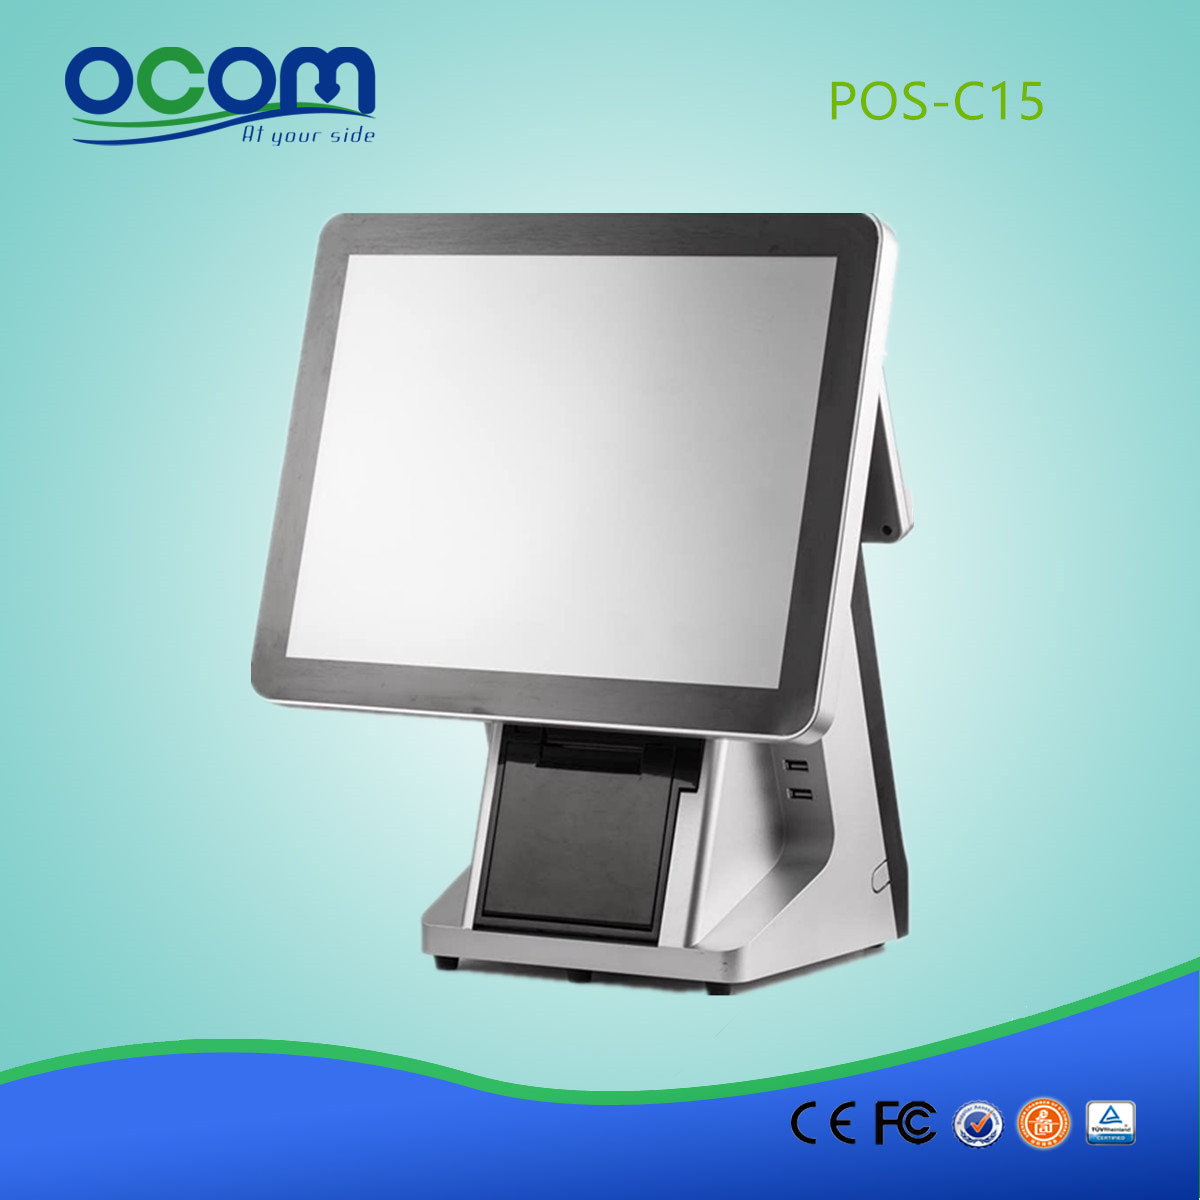 POS-C15-China fabriek J1900 32G SSD alles in een 15 inch touch-pos terminal